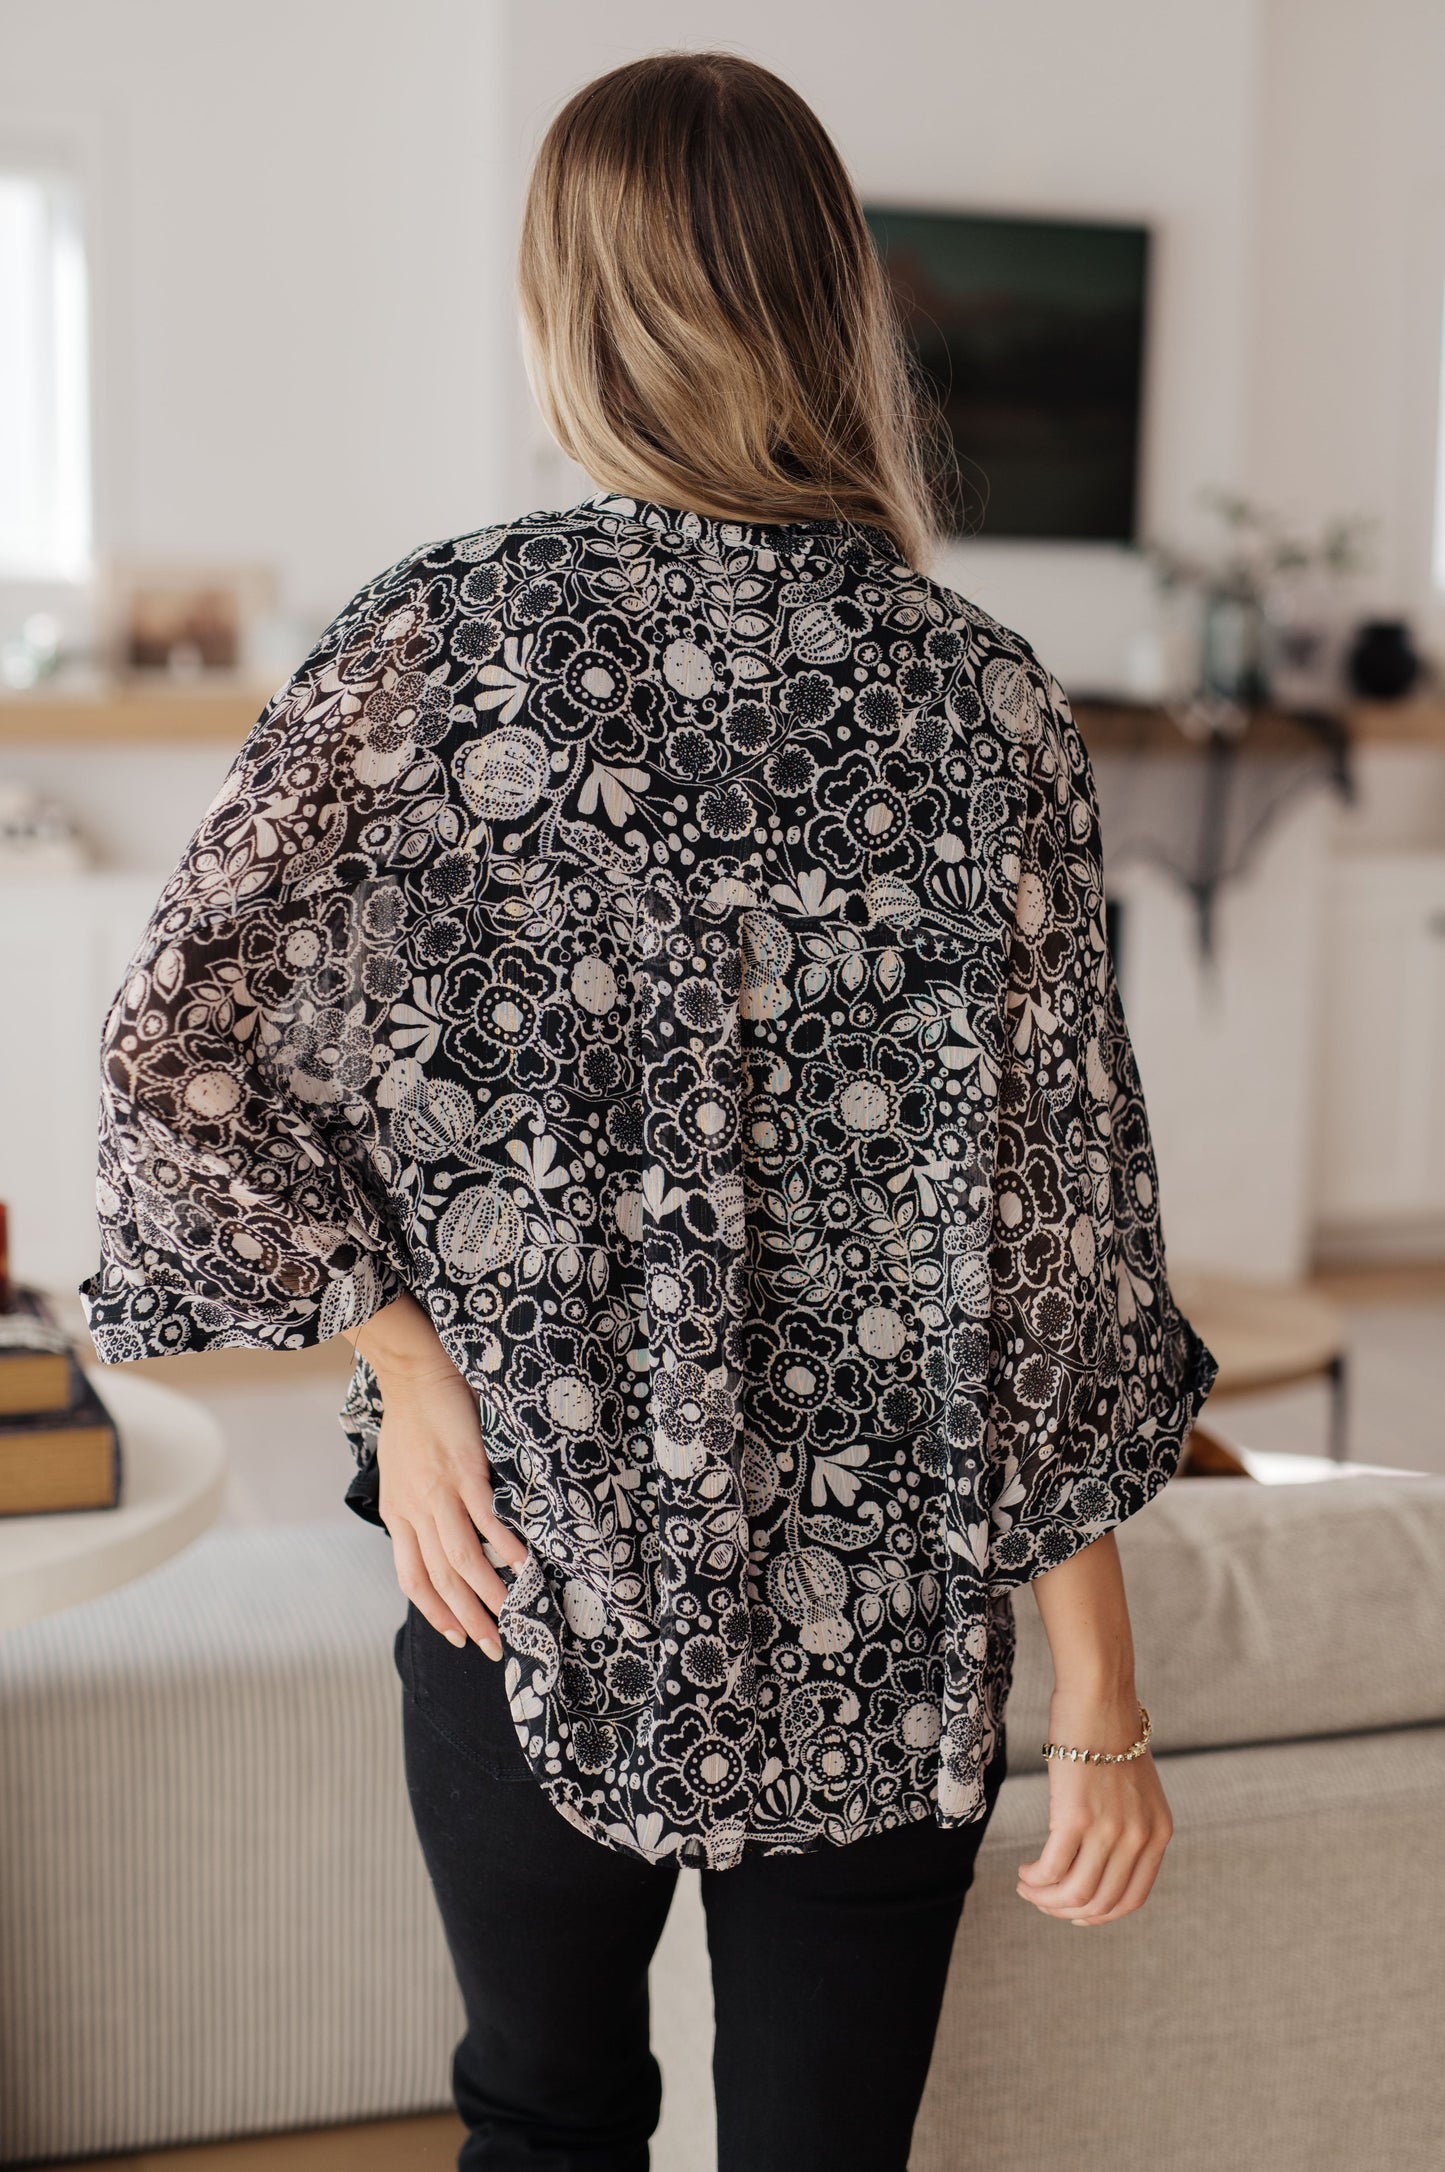 Black and White Floral Top